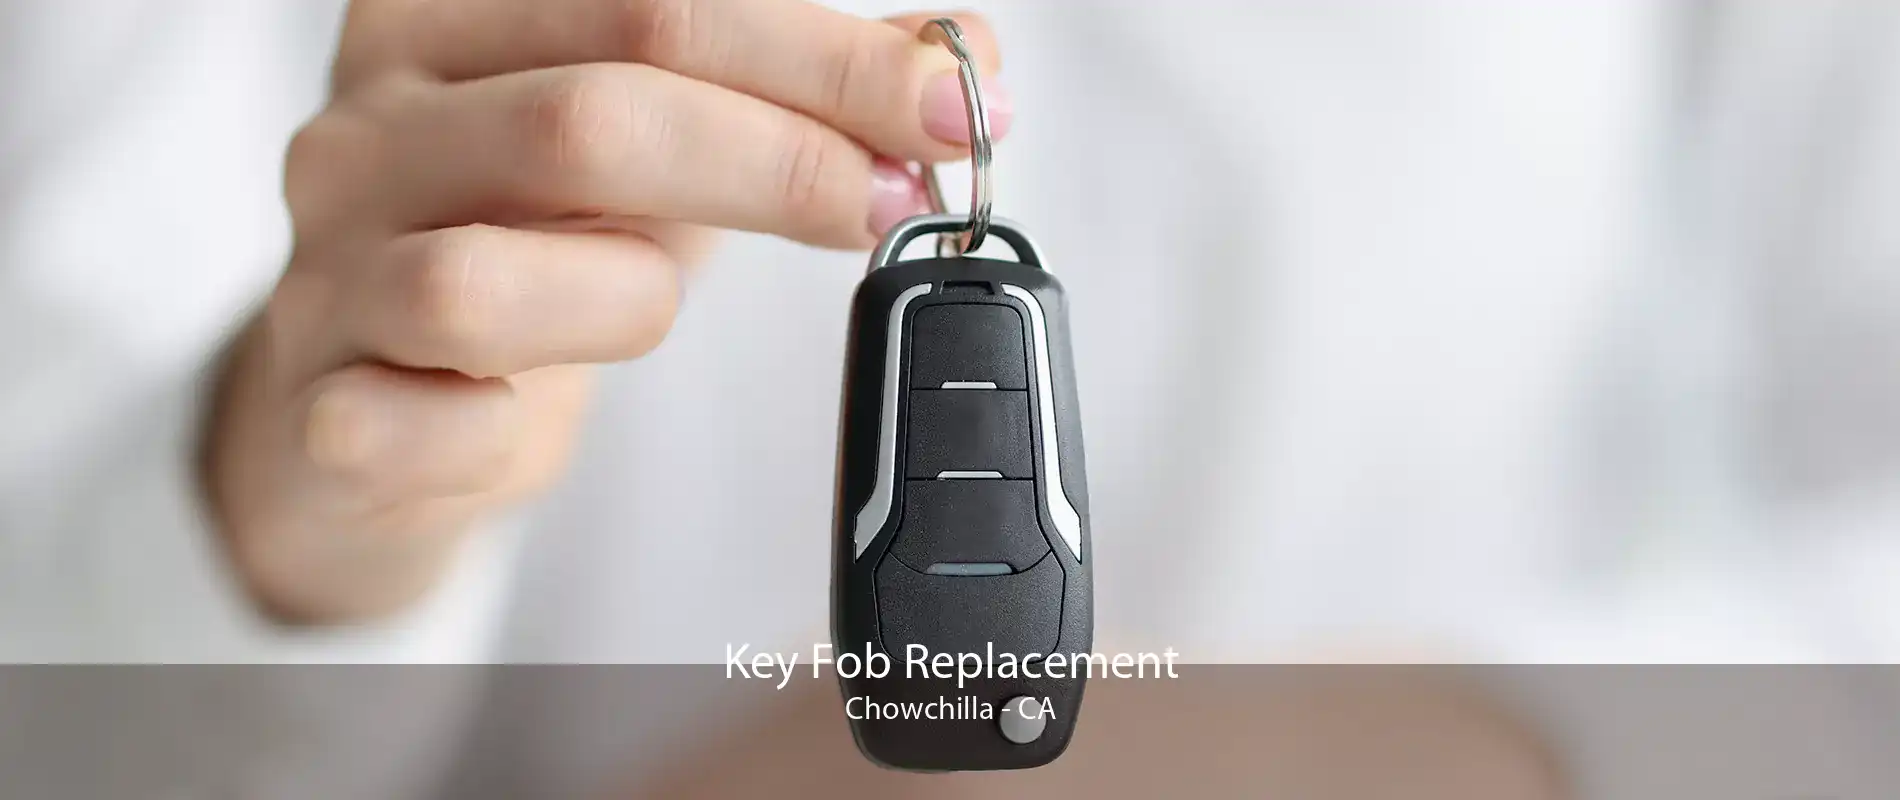 Key Fob Replacement Chowchilla - CA